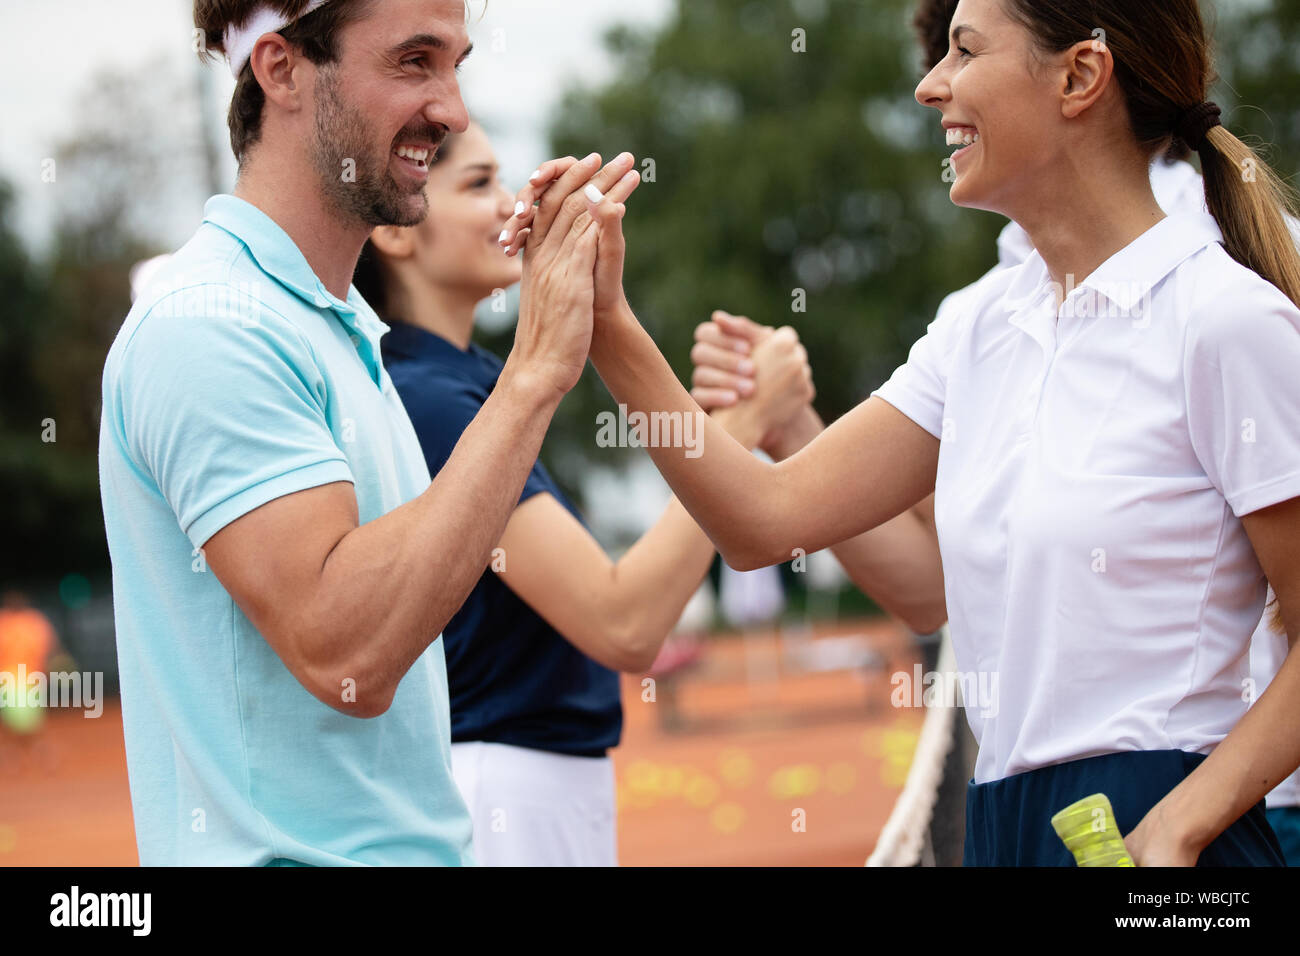 Group of healthy happy friends at the club playing tennis Stock Photo